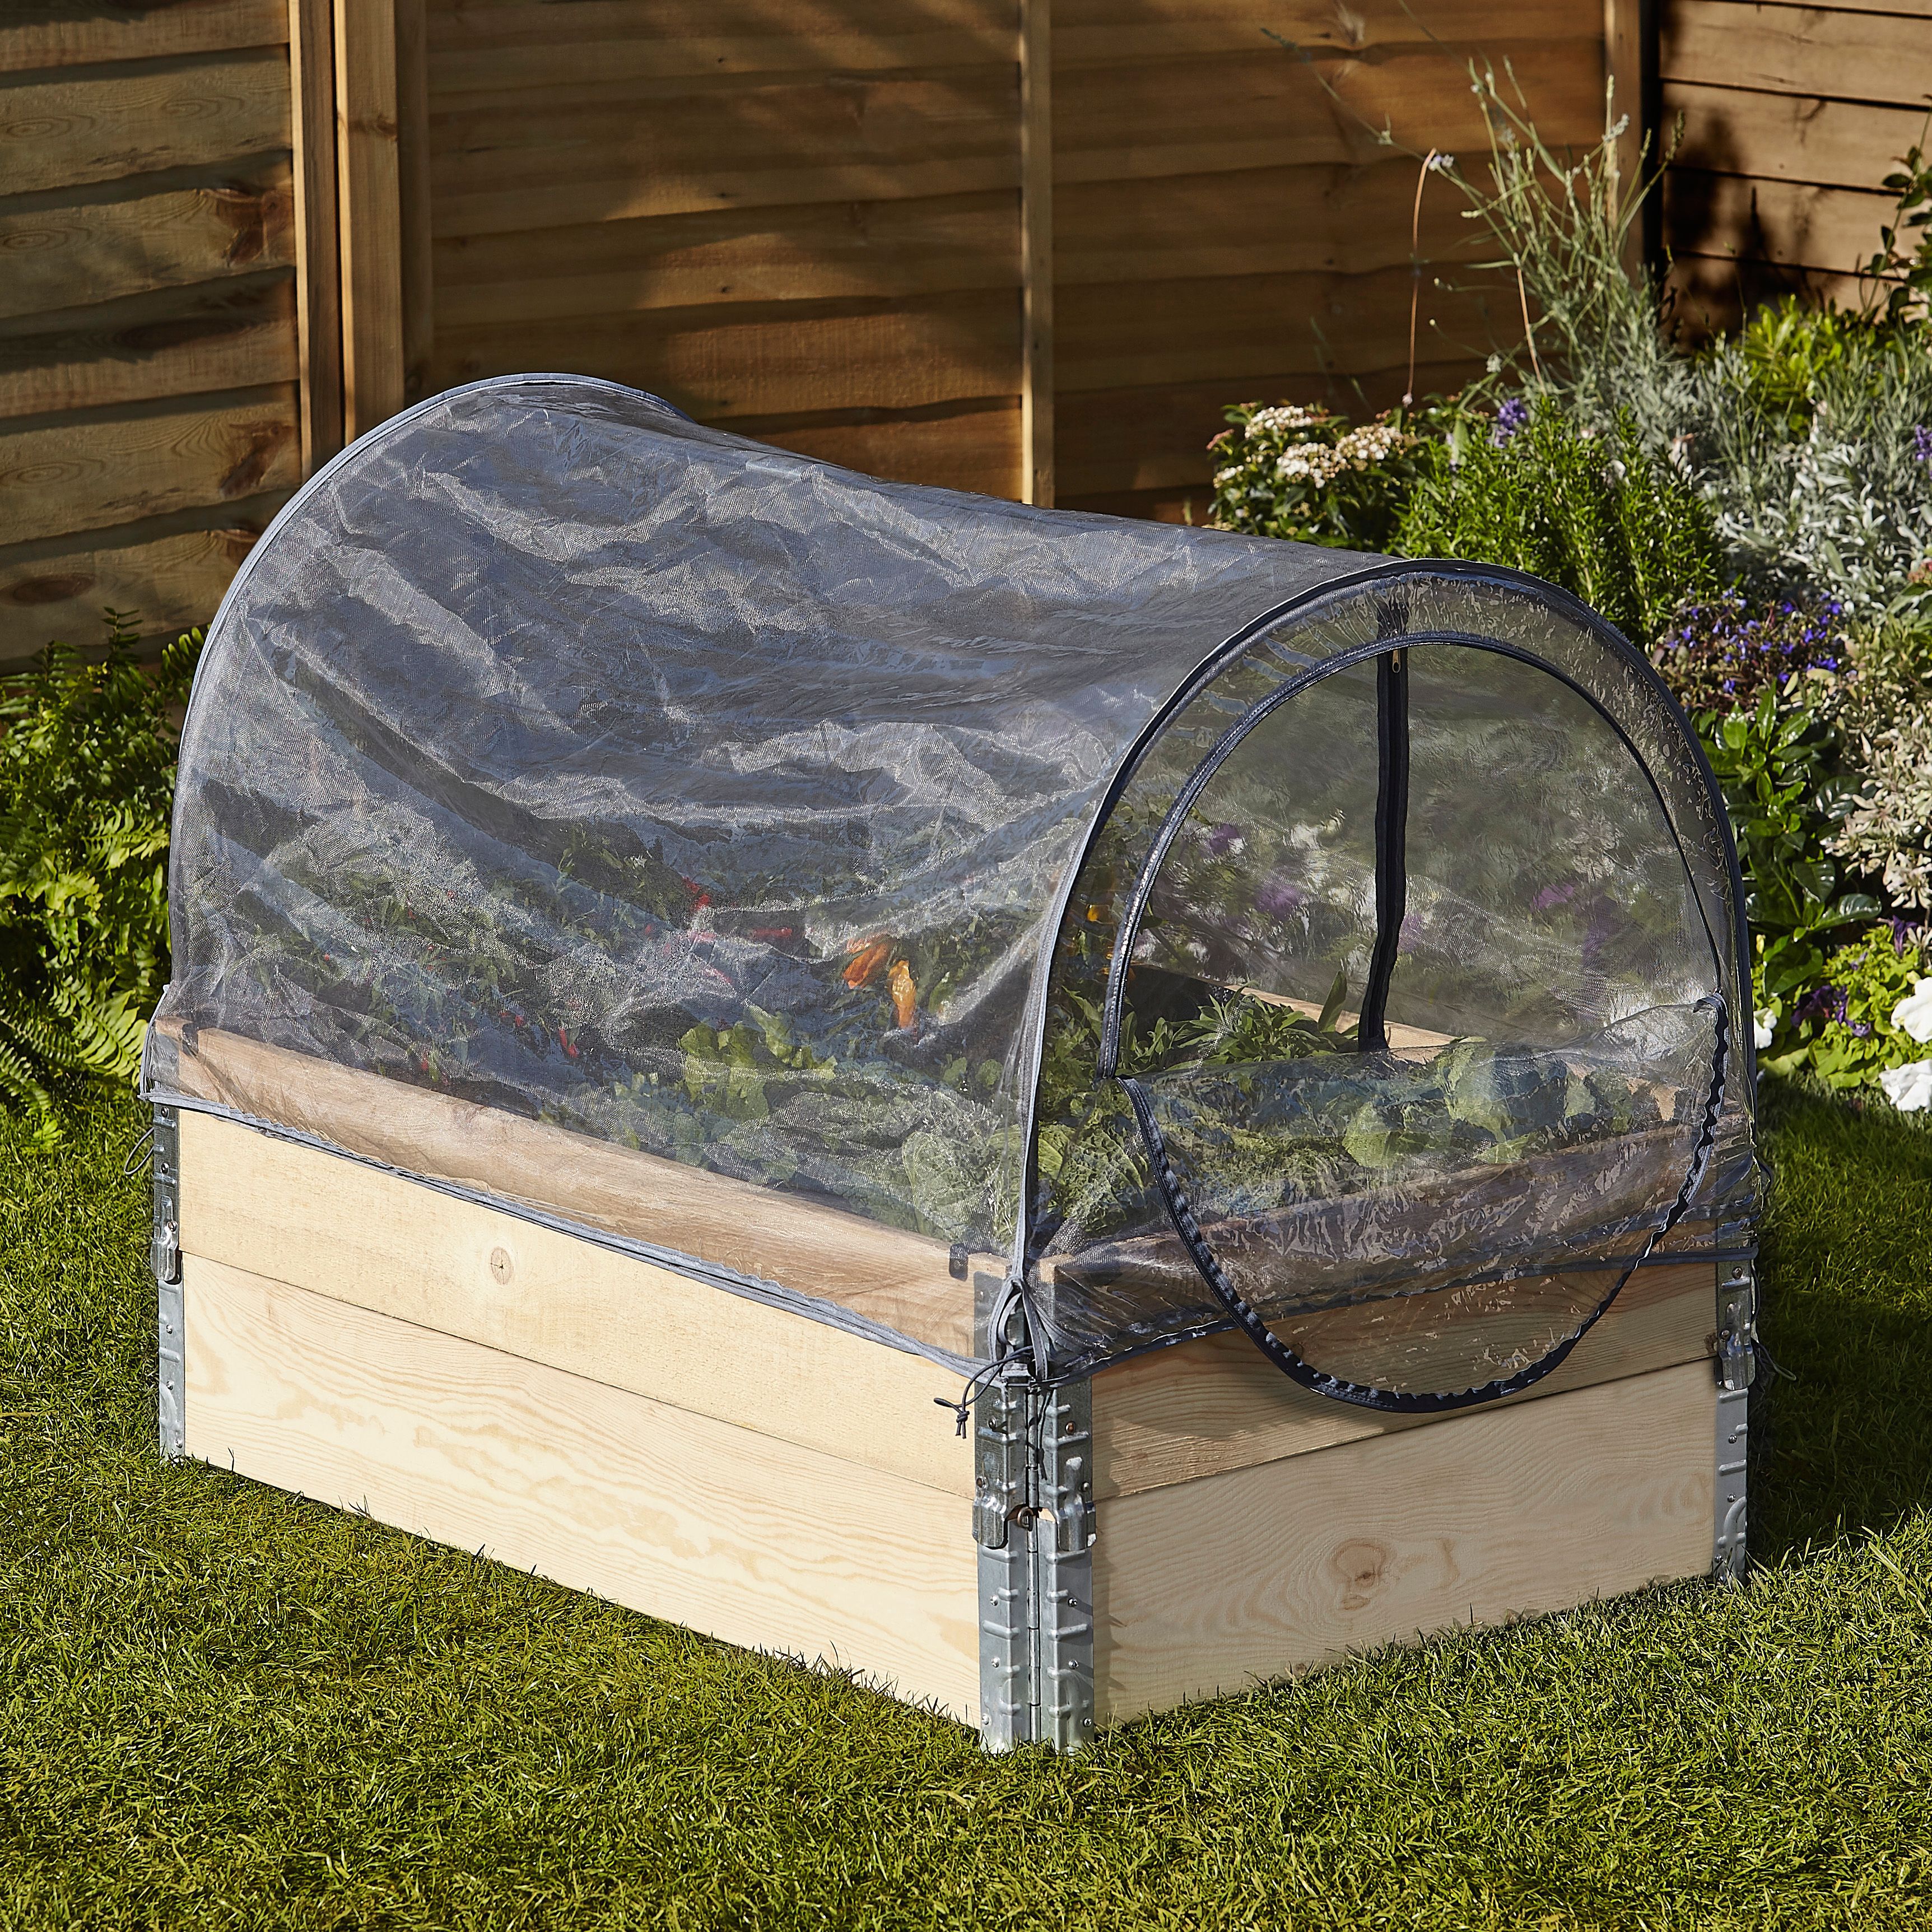 Verve Kitchen garden Large 0.88m² Grow tunnel cover with plastic cover